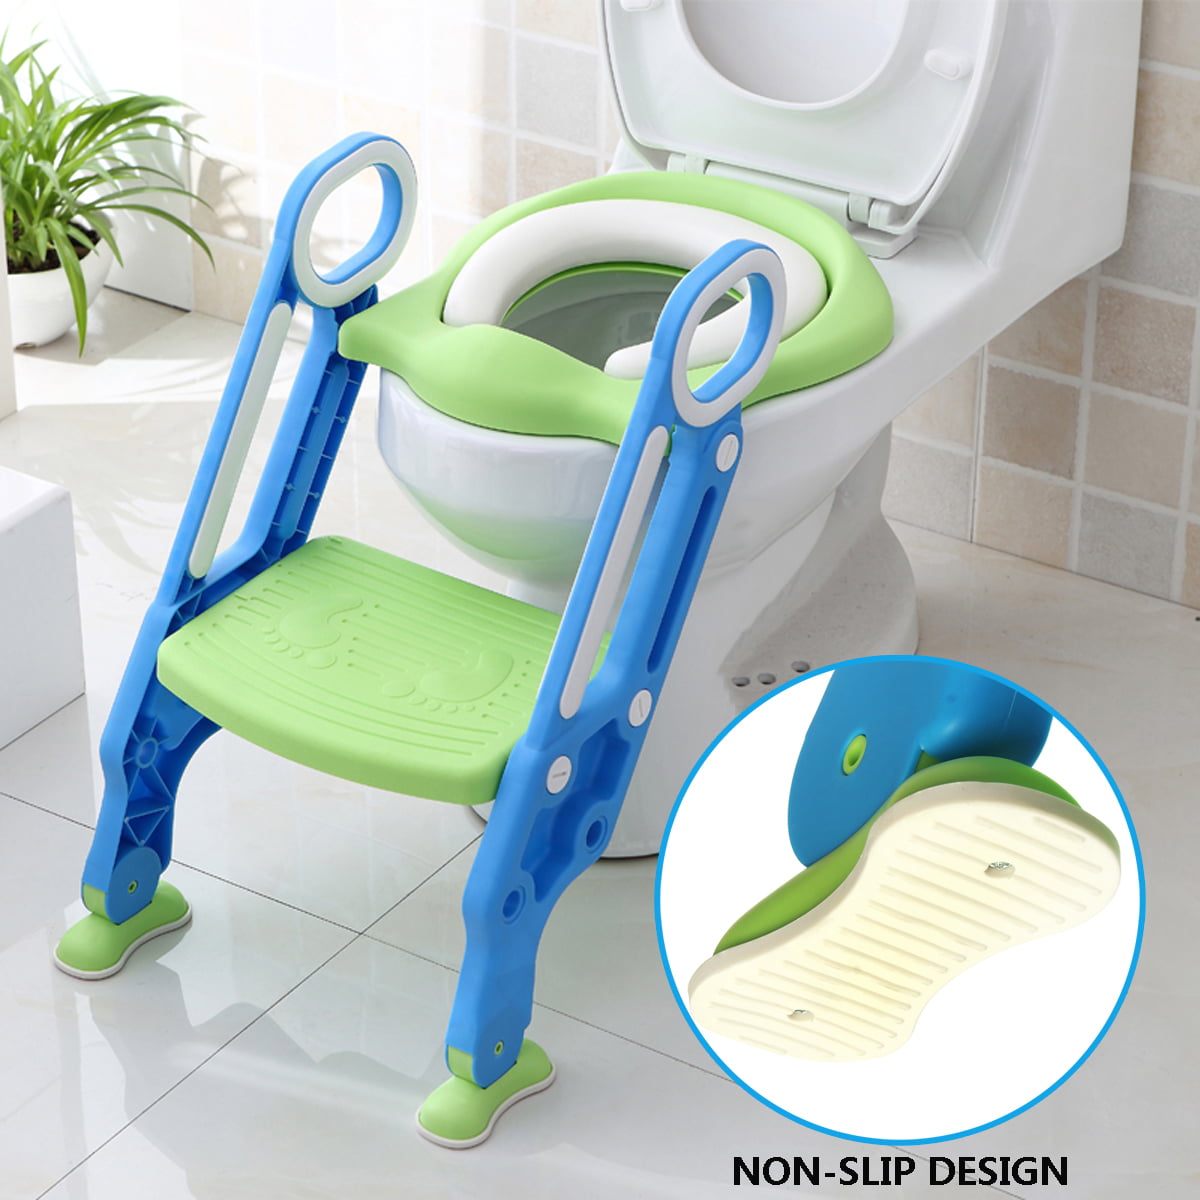 potty training seat for baby